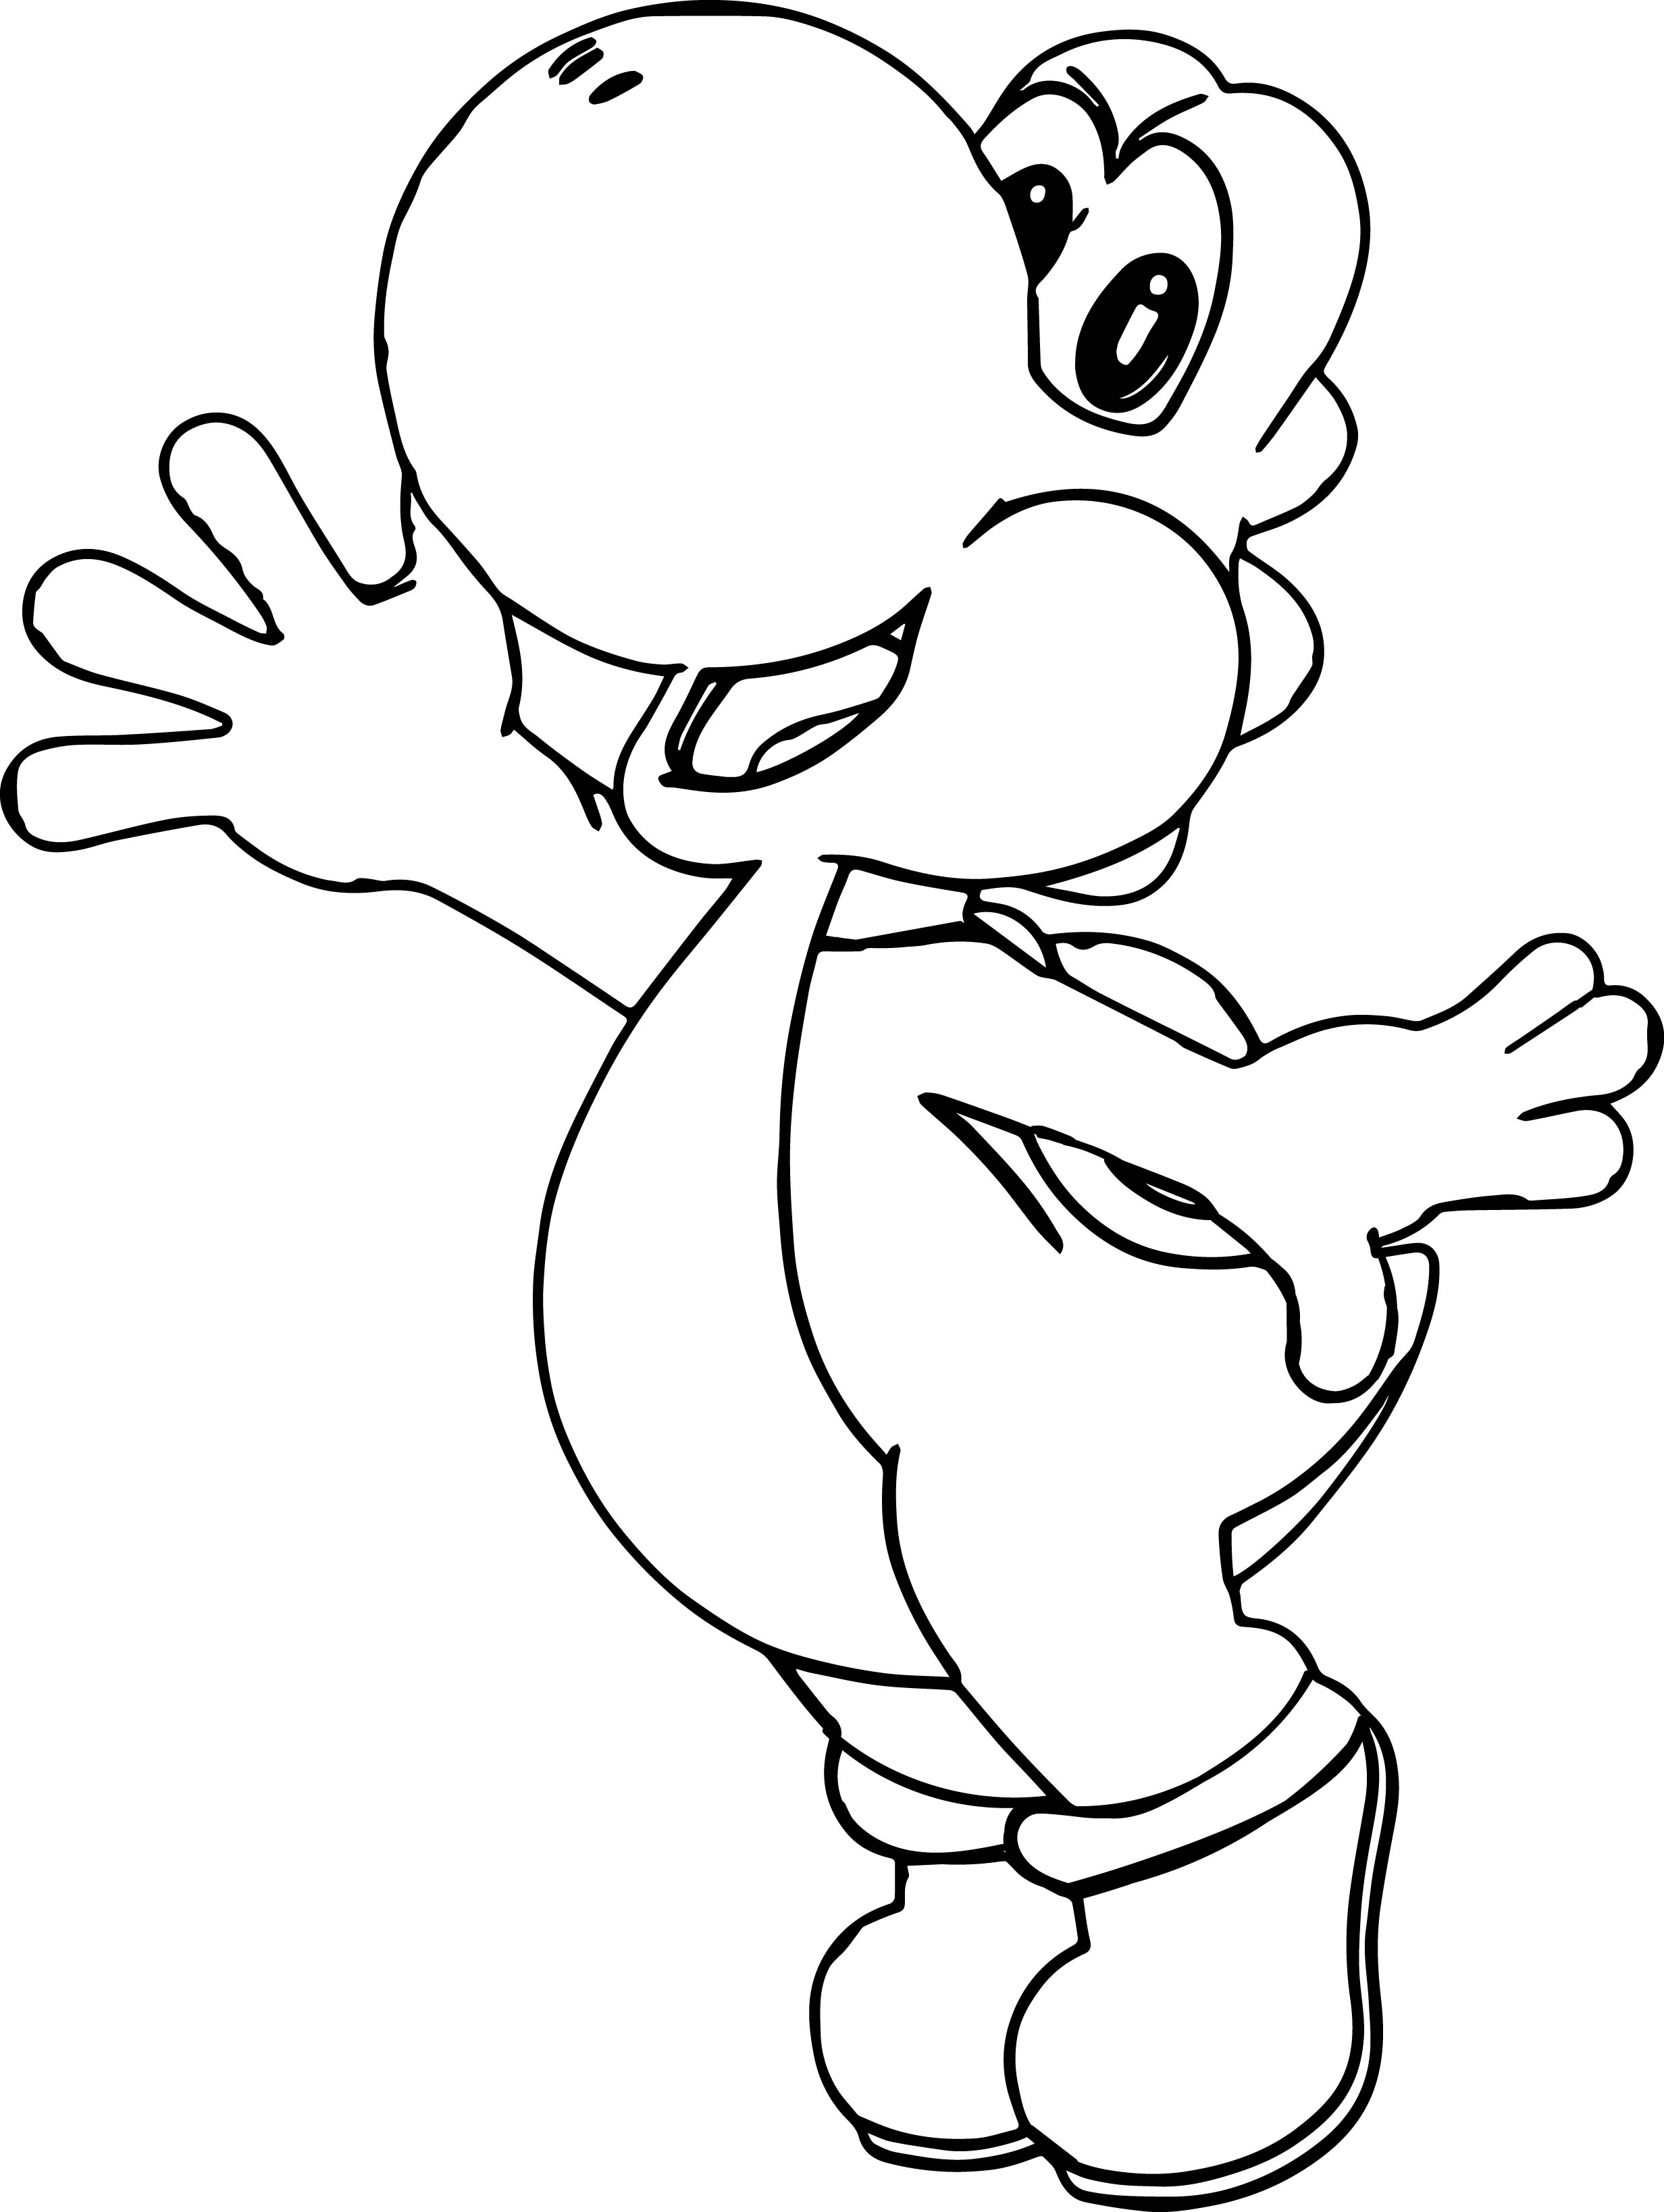 yoshi printable coloring pages free free printable yoshi coloring pages for kids coloring yoshi pages printable free 